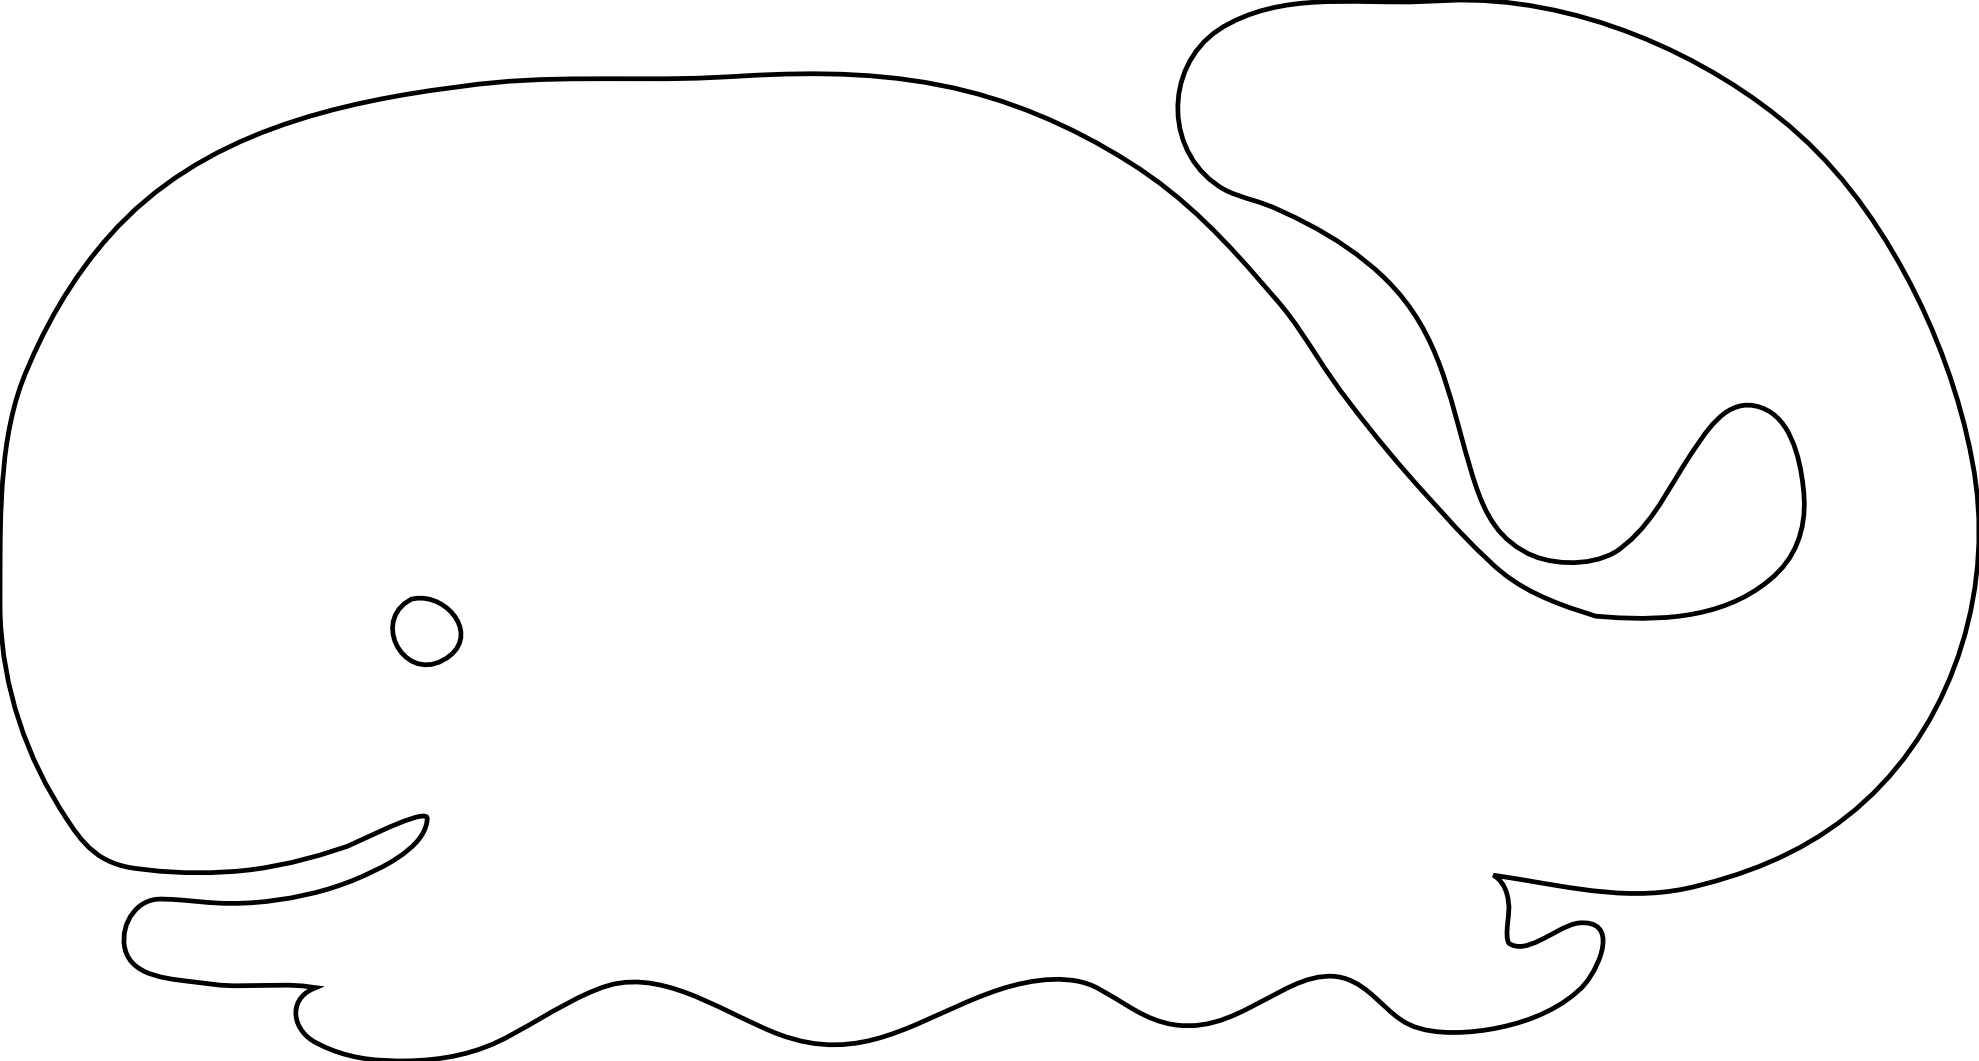 Whale black and white whale outline clip art black – Gclipart